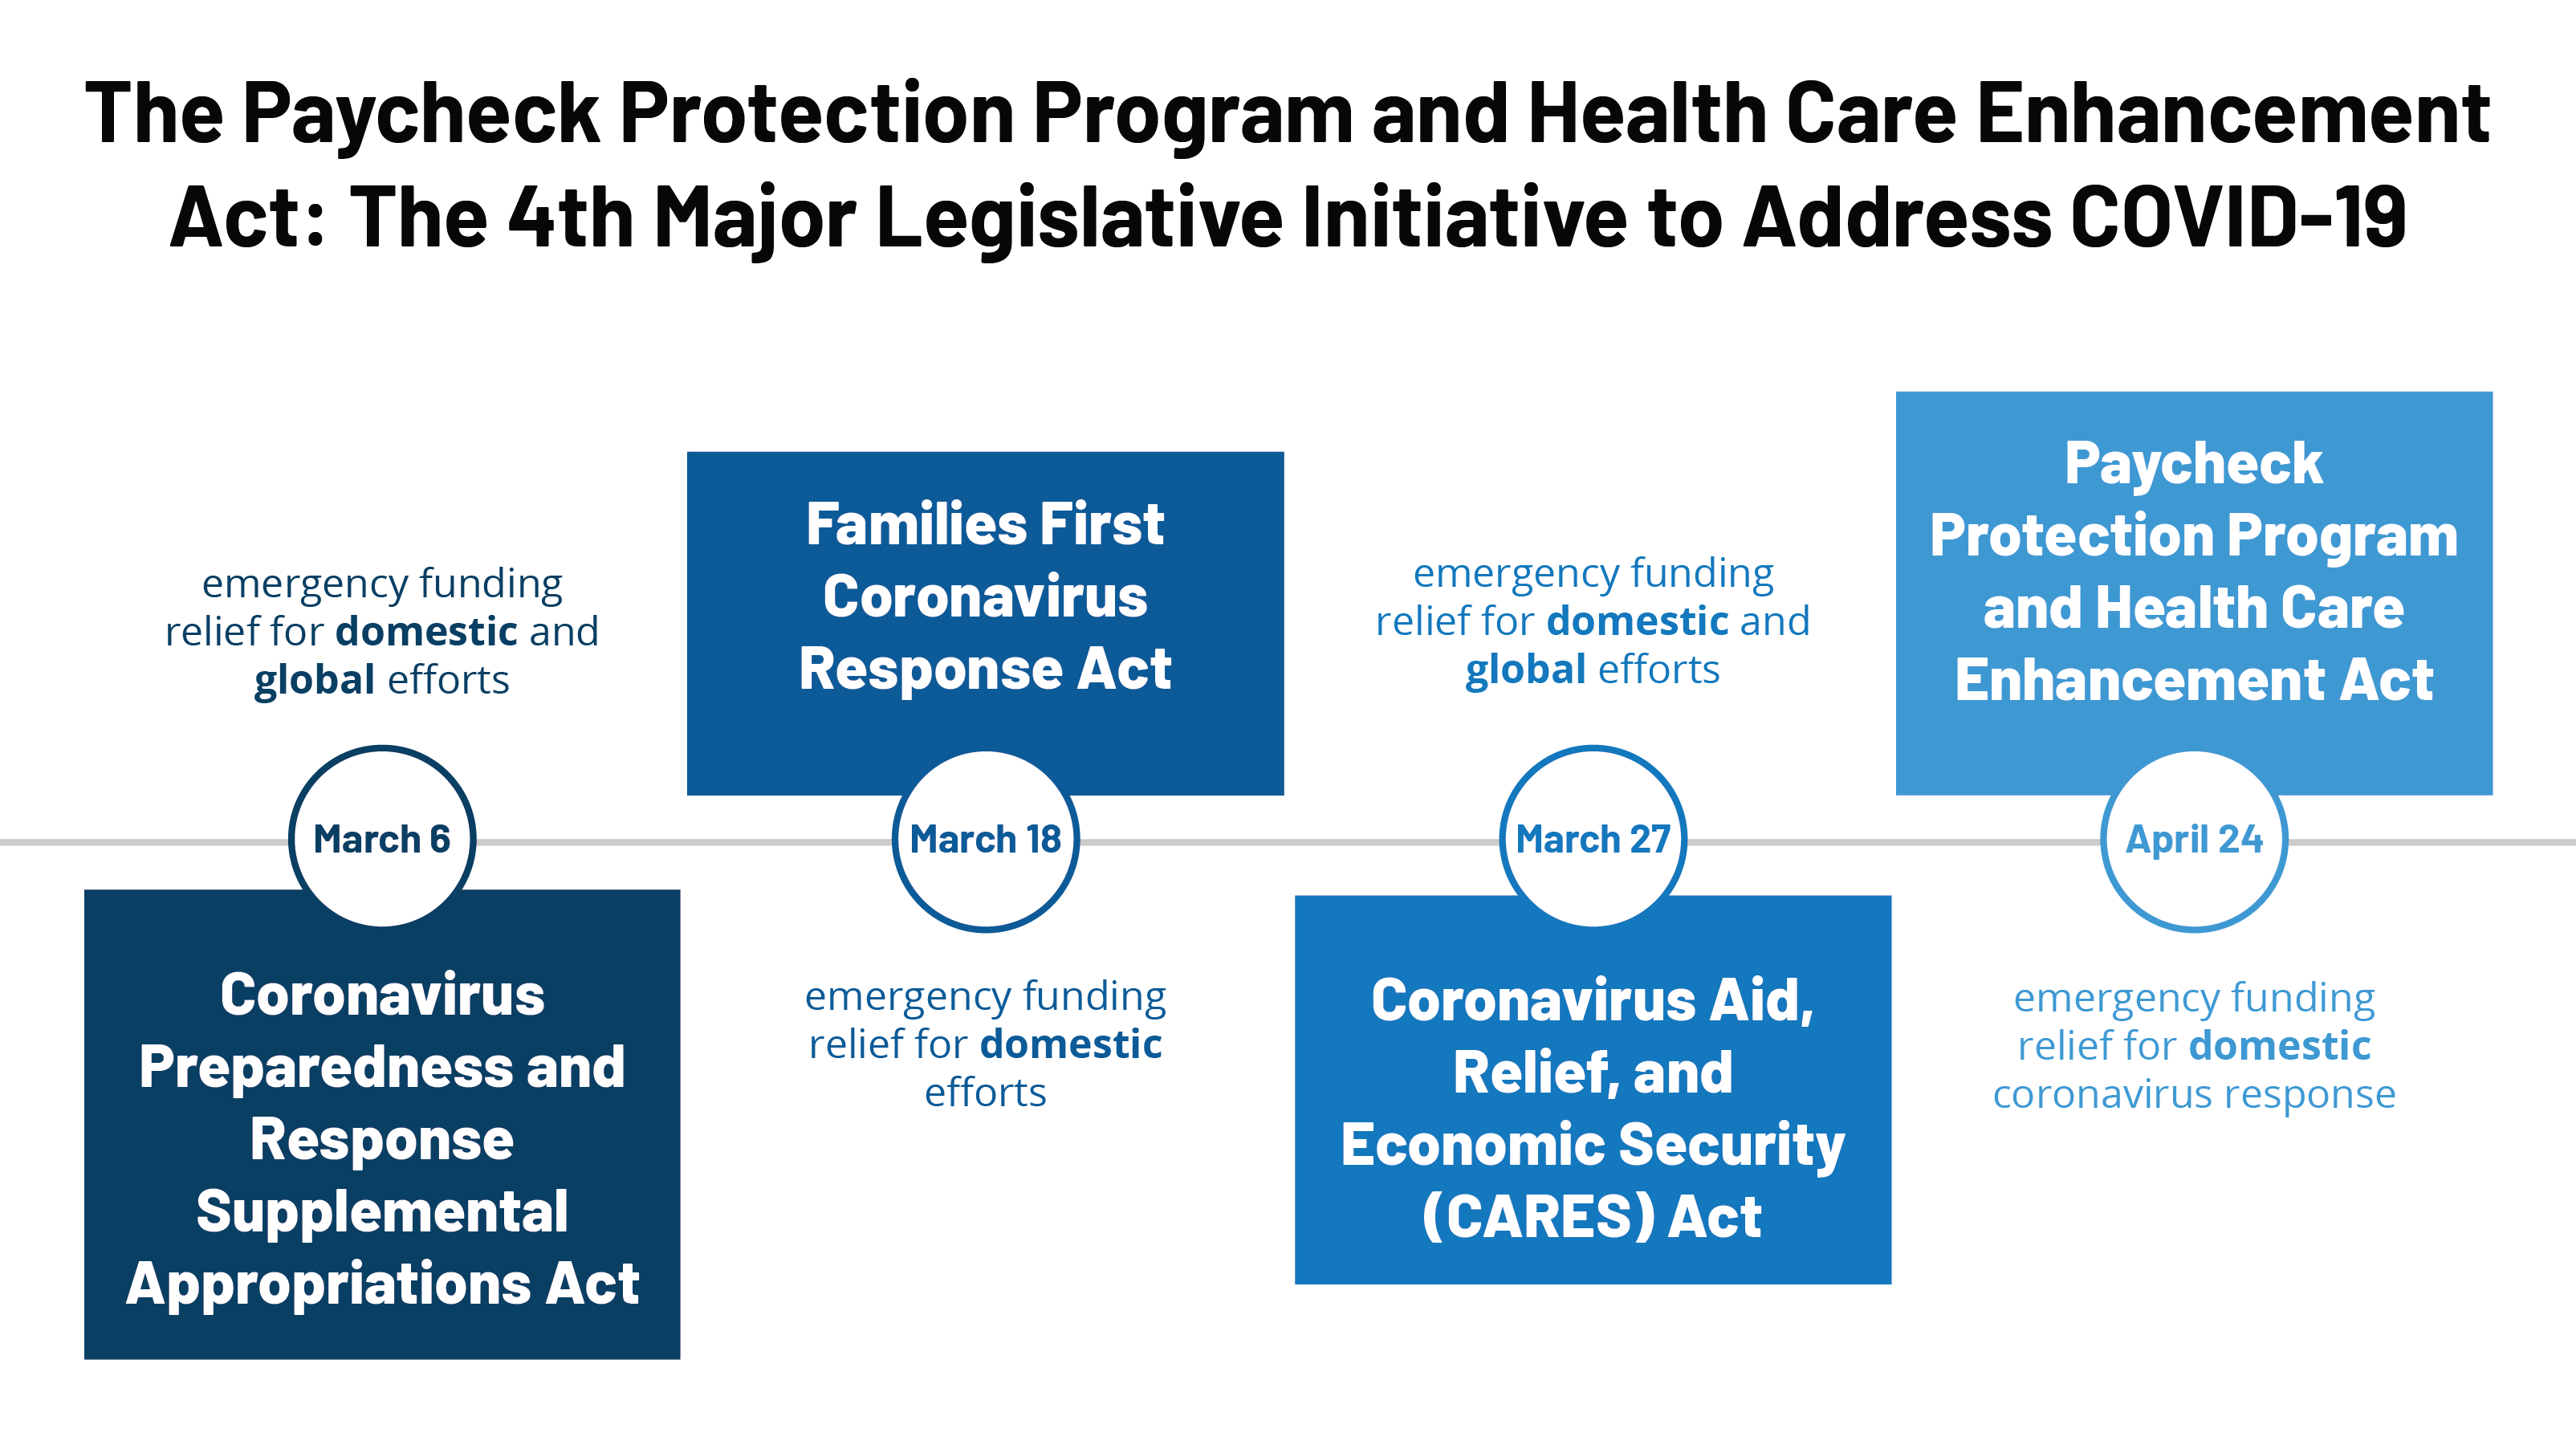 The Paycheck Protection Program and Health Care Enhancement Act